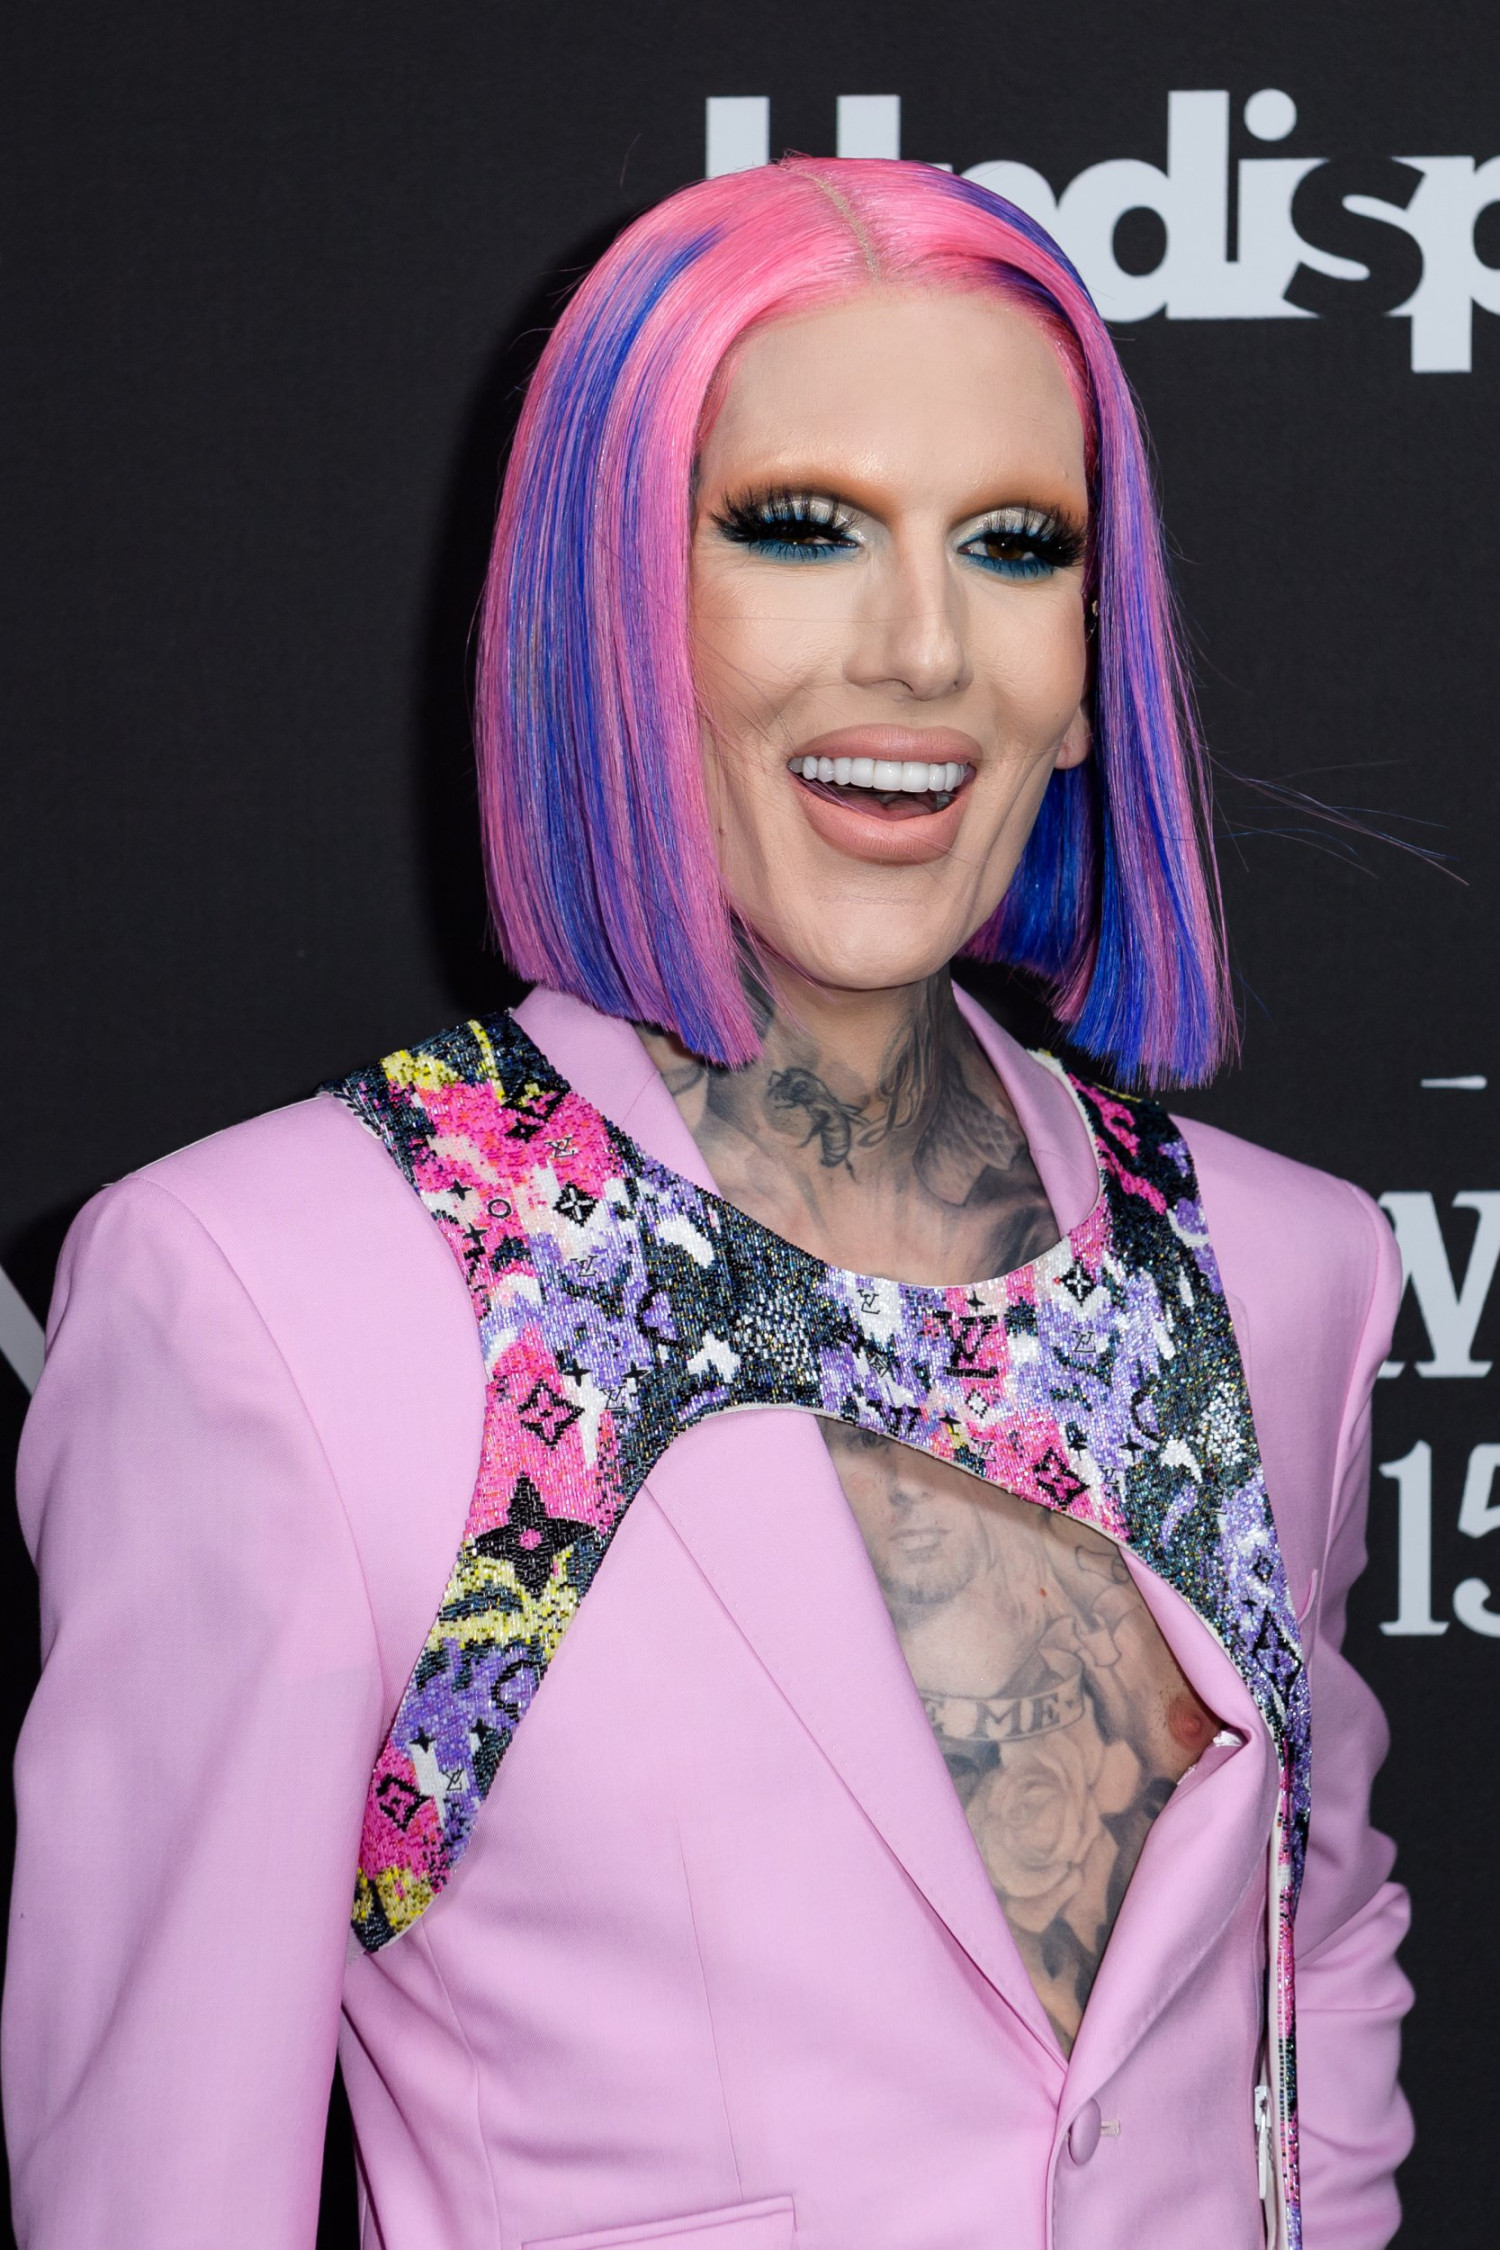 What is Jeffree Star